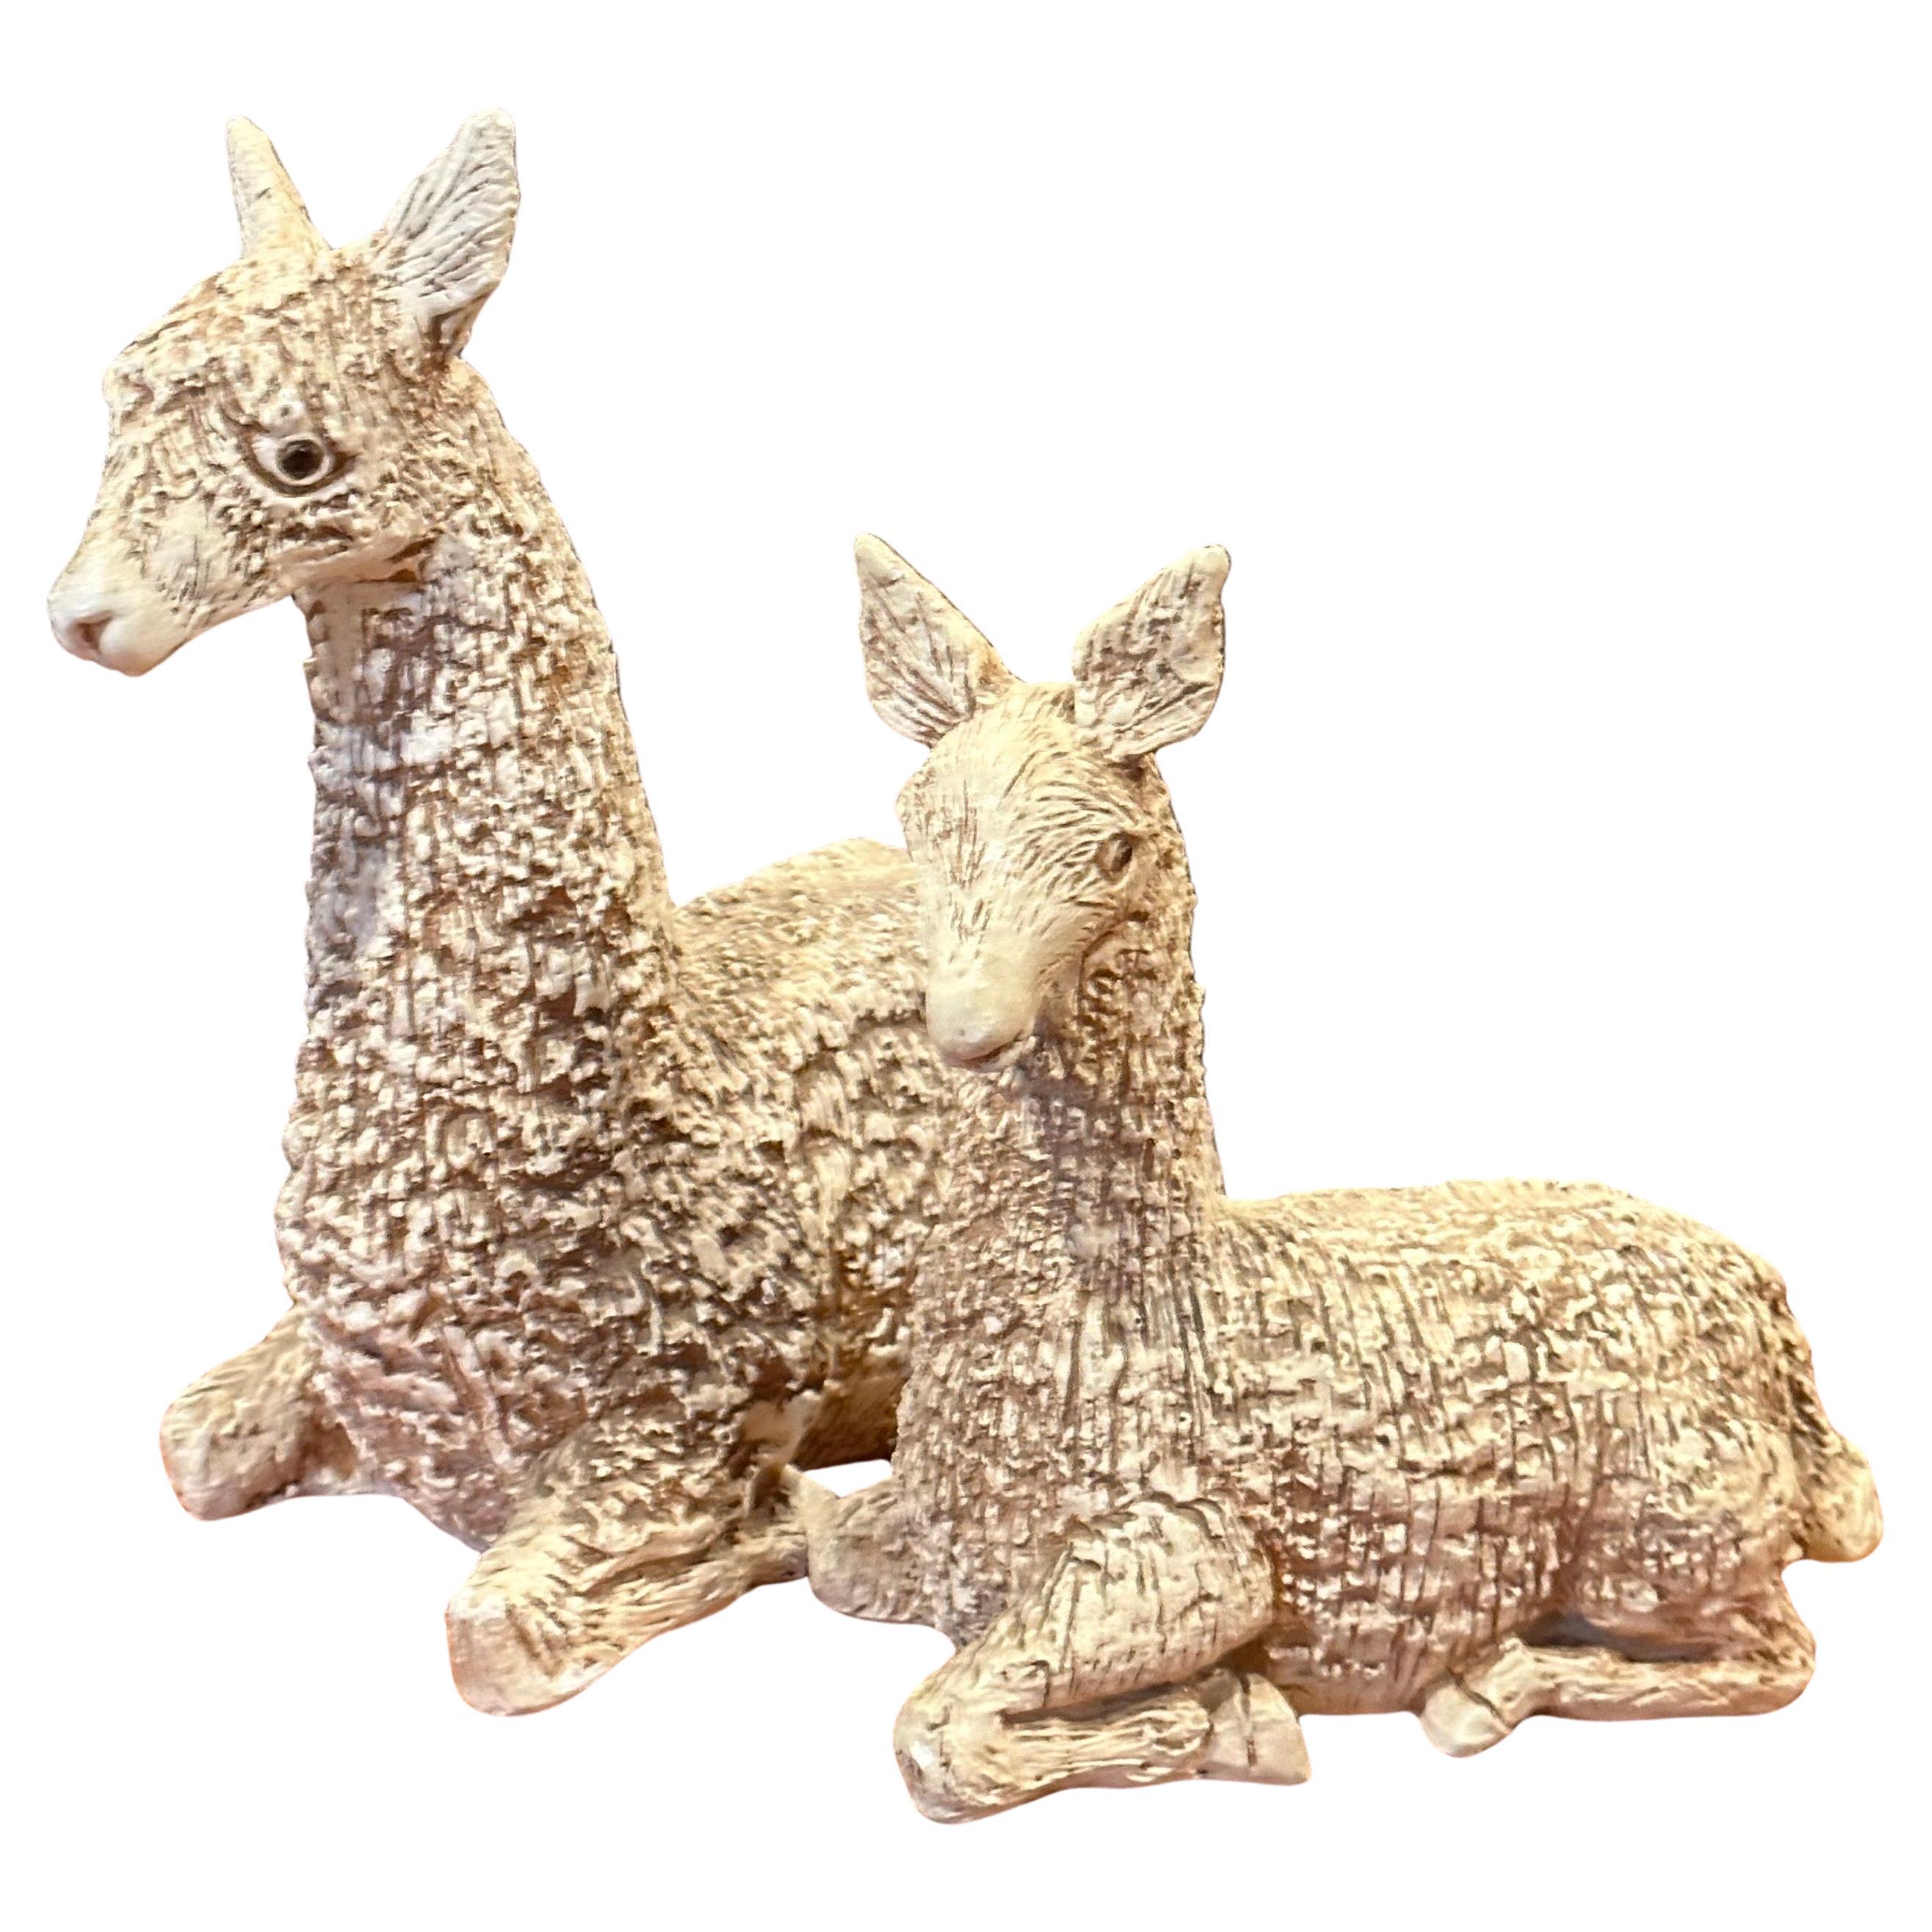 A very cool and substantial pair of mid-century stoneware or plaster llamas by Jaru, circa 1979. Mother and baby llama have been beautifully sculpted with deep striking texture and glazed to bring them to a rich deep beige color.

Mother stands 11